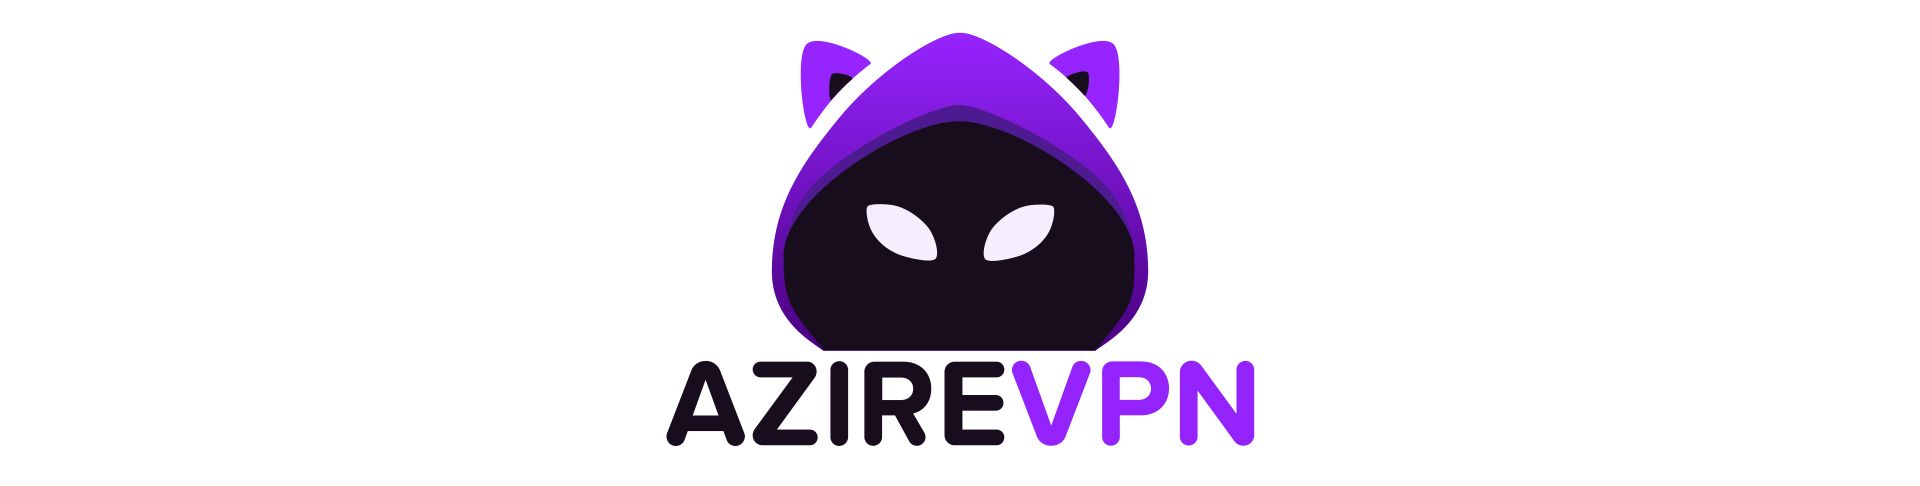 AzireVPN referral challenge is on: refer your friends and win big!